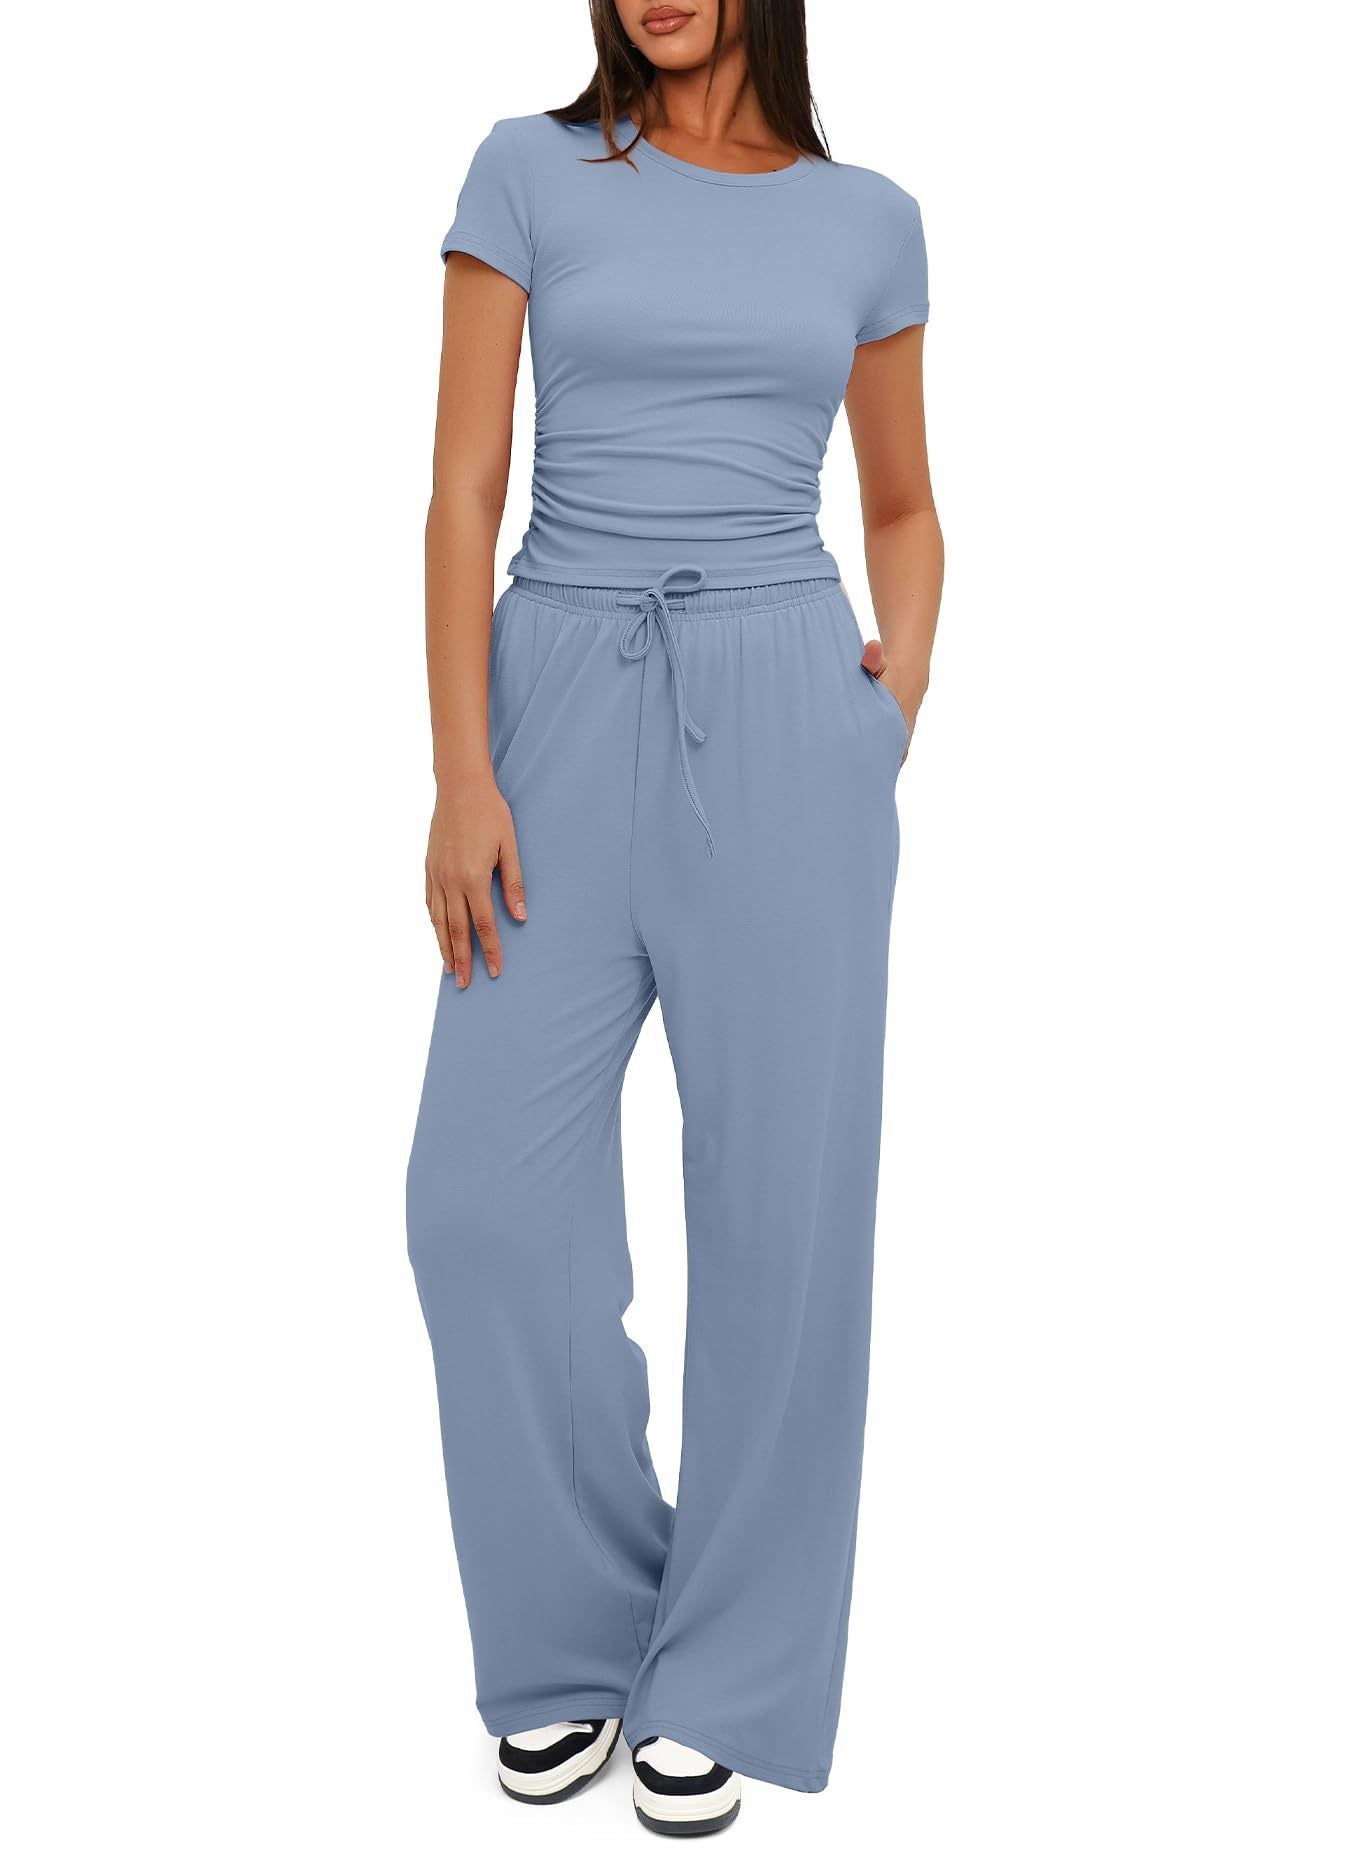 Blue - 2pcs Solid Color Casual Sport Short-sleeved Women'sTop And High-waisted Drawstring Wide-leg Pants - womens pants set at TFC&H Co.